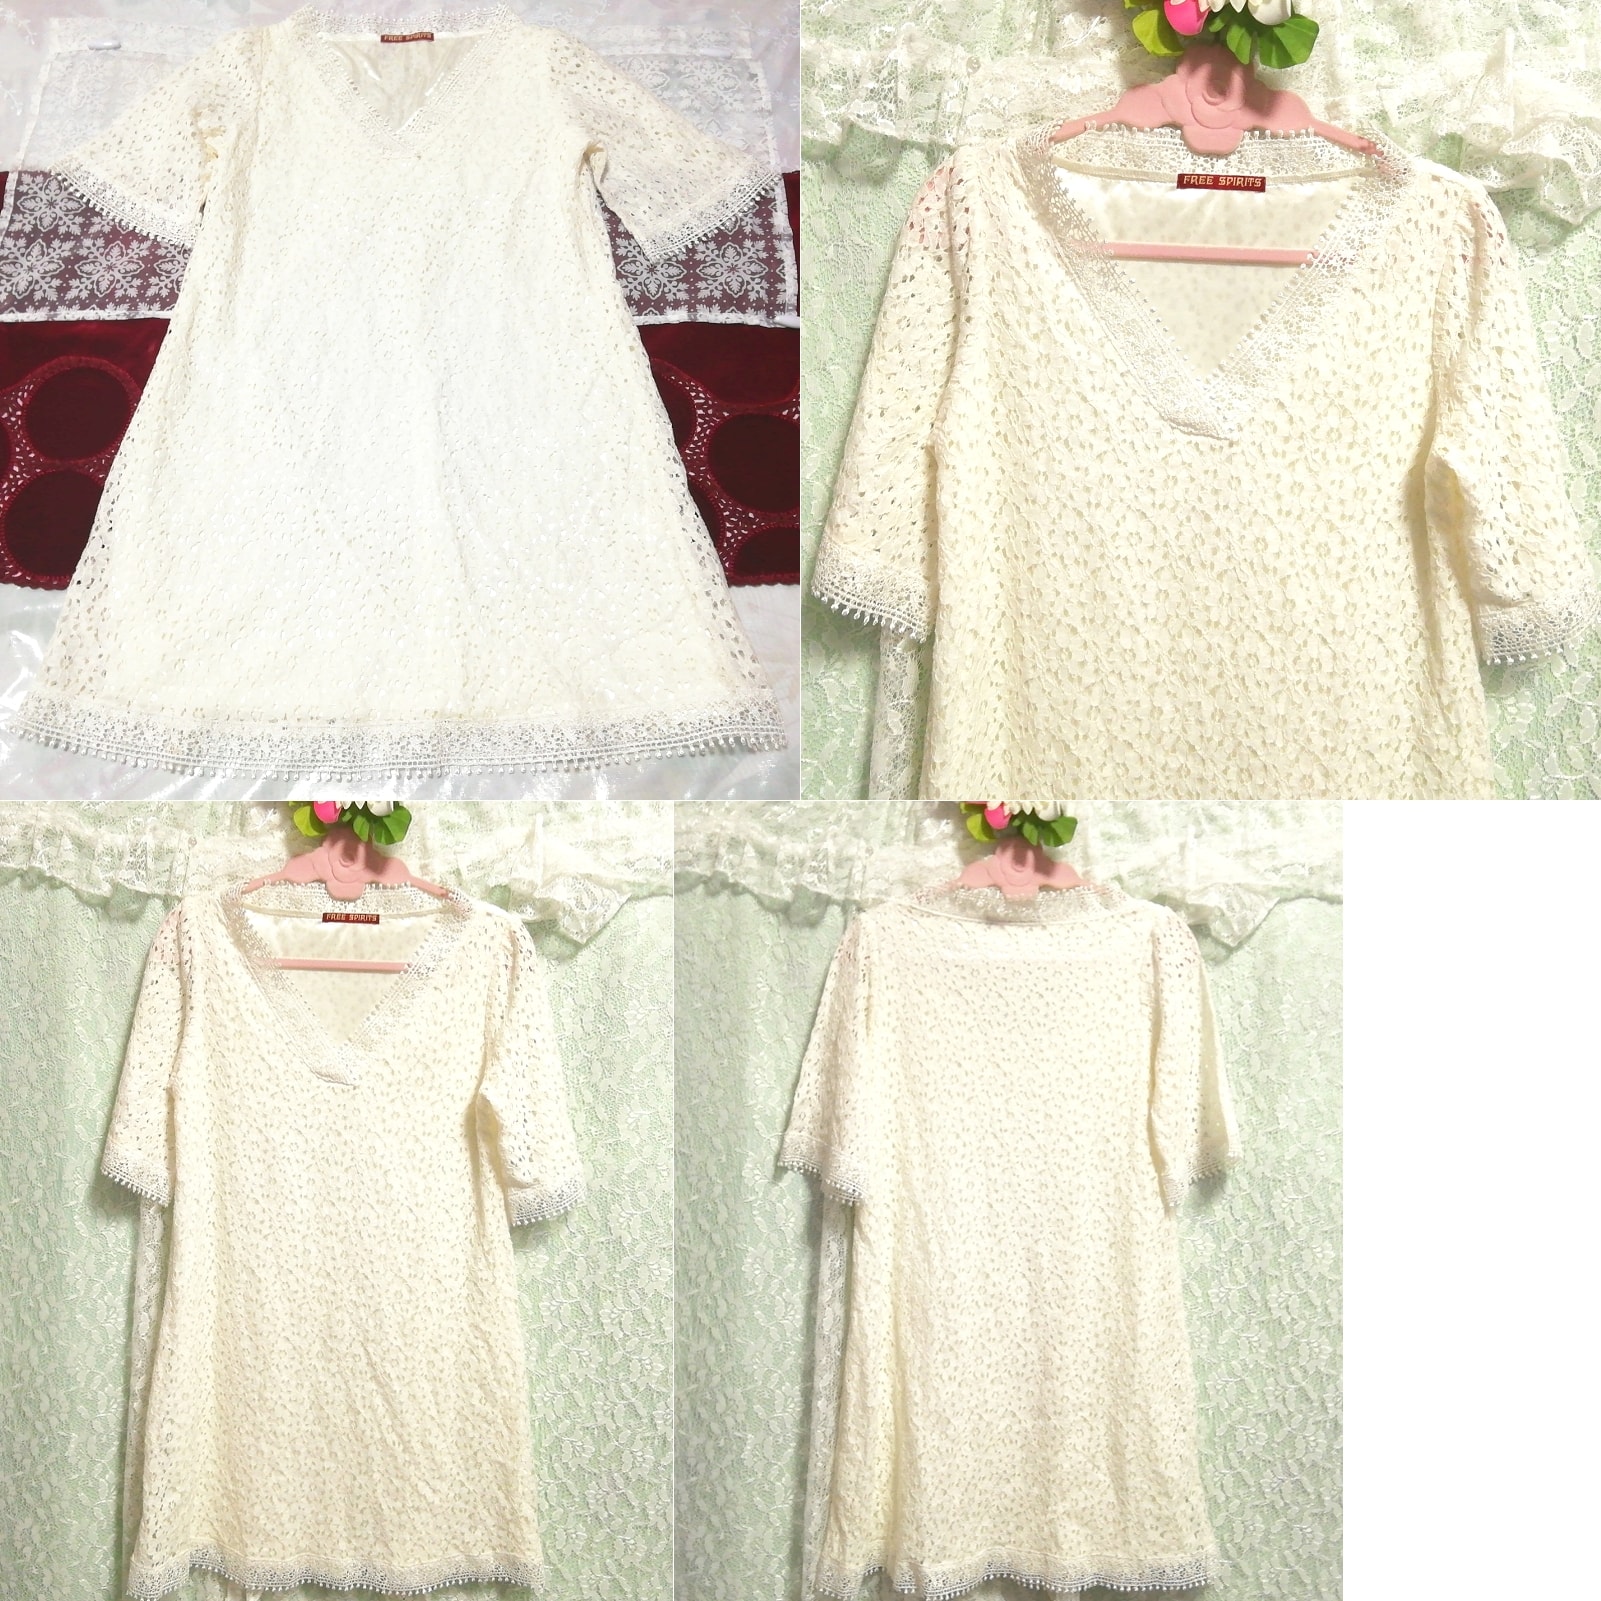 White knitted white v neck lace negligee nightgown nightwear, tunic, short sleeve, m size